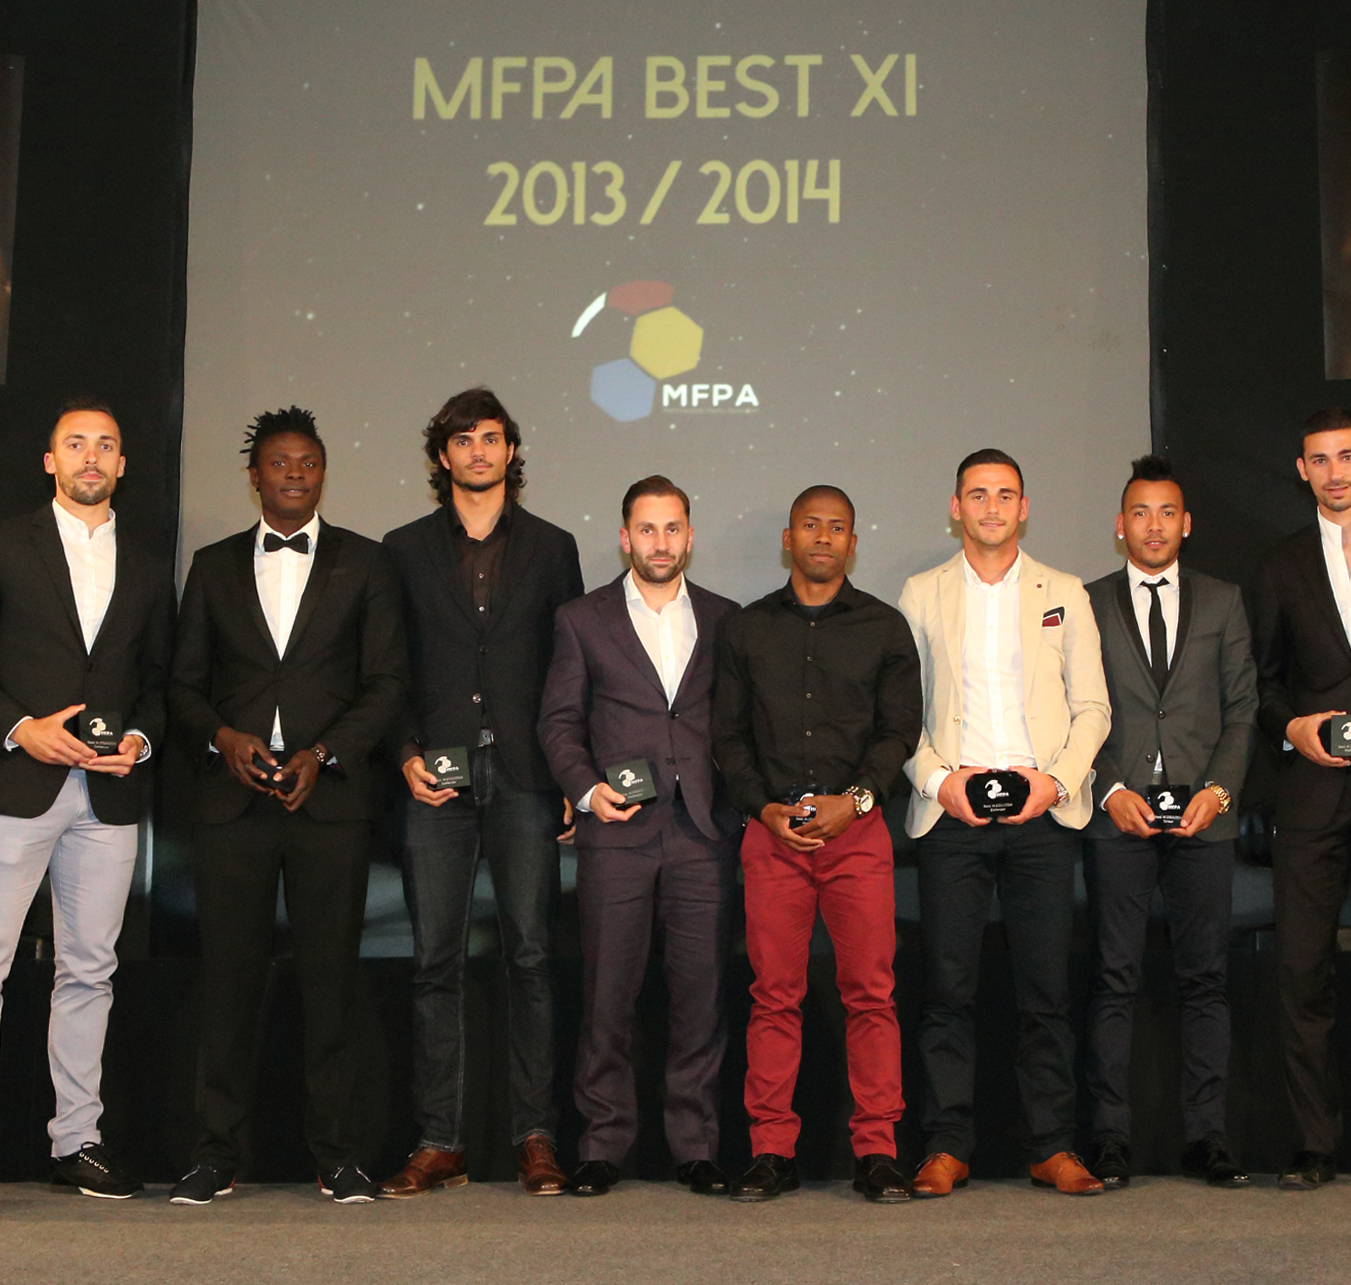 Paul Fenech voted MFPA best player of the year